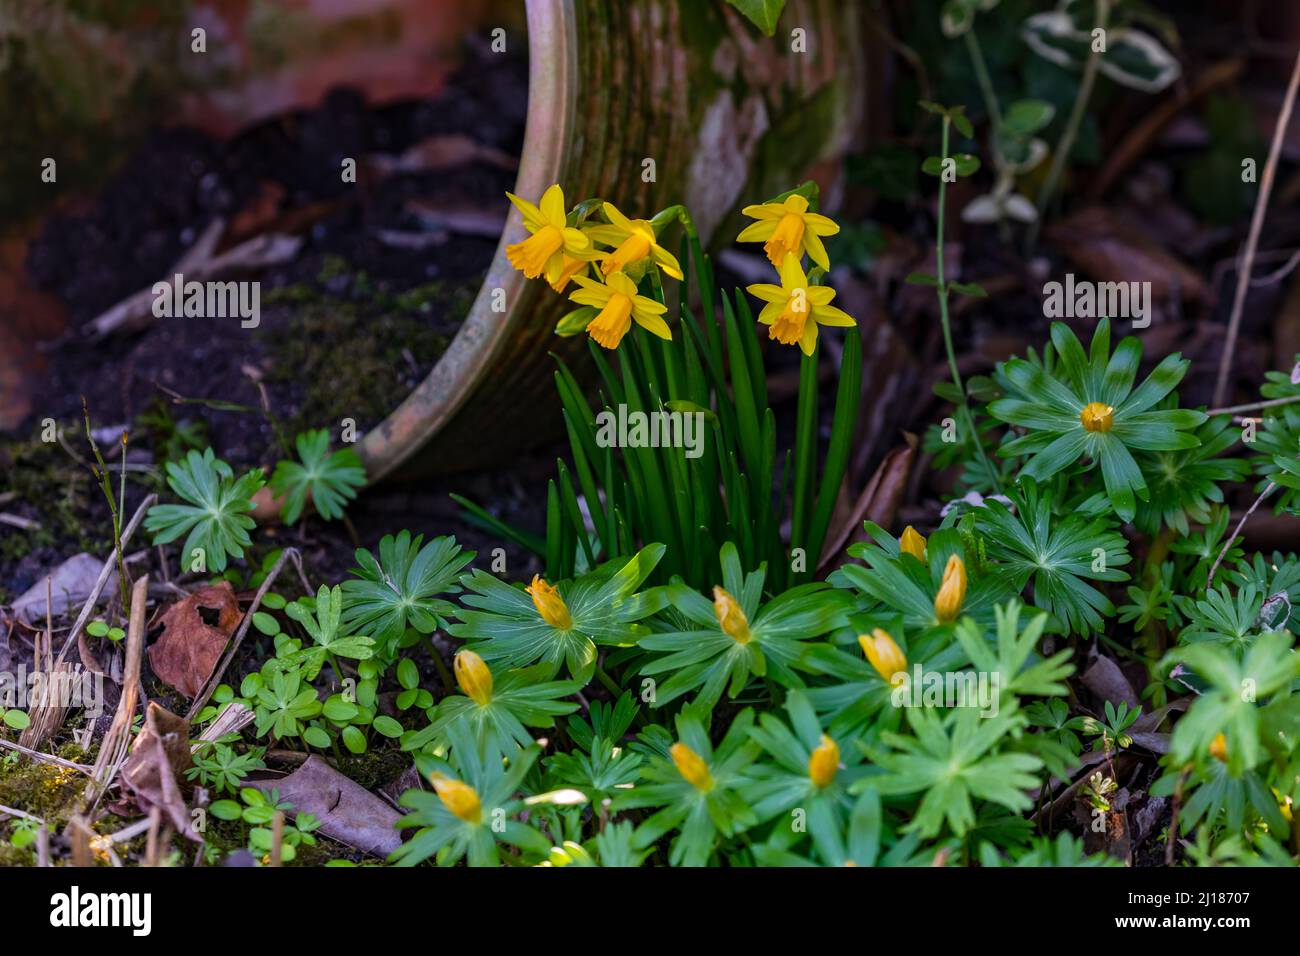 A clay jar of yellow daffodils in a picturesque garden in Spring Stock Photo